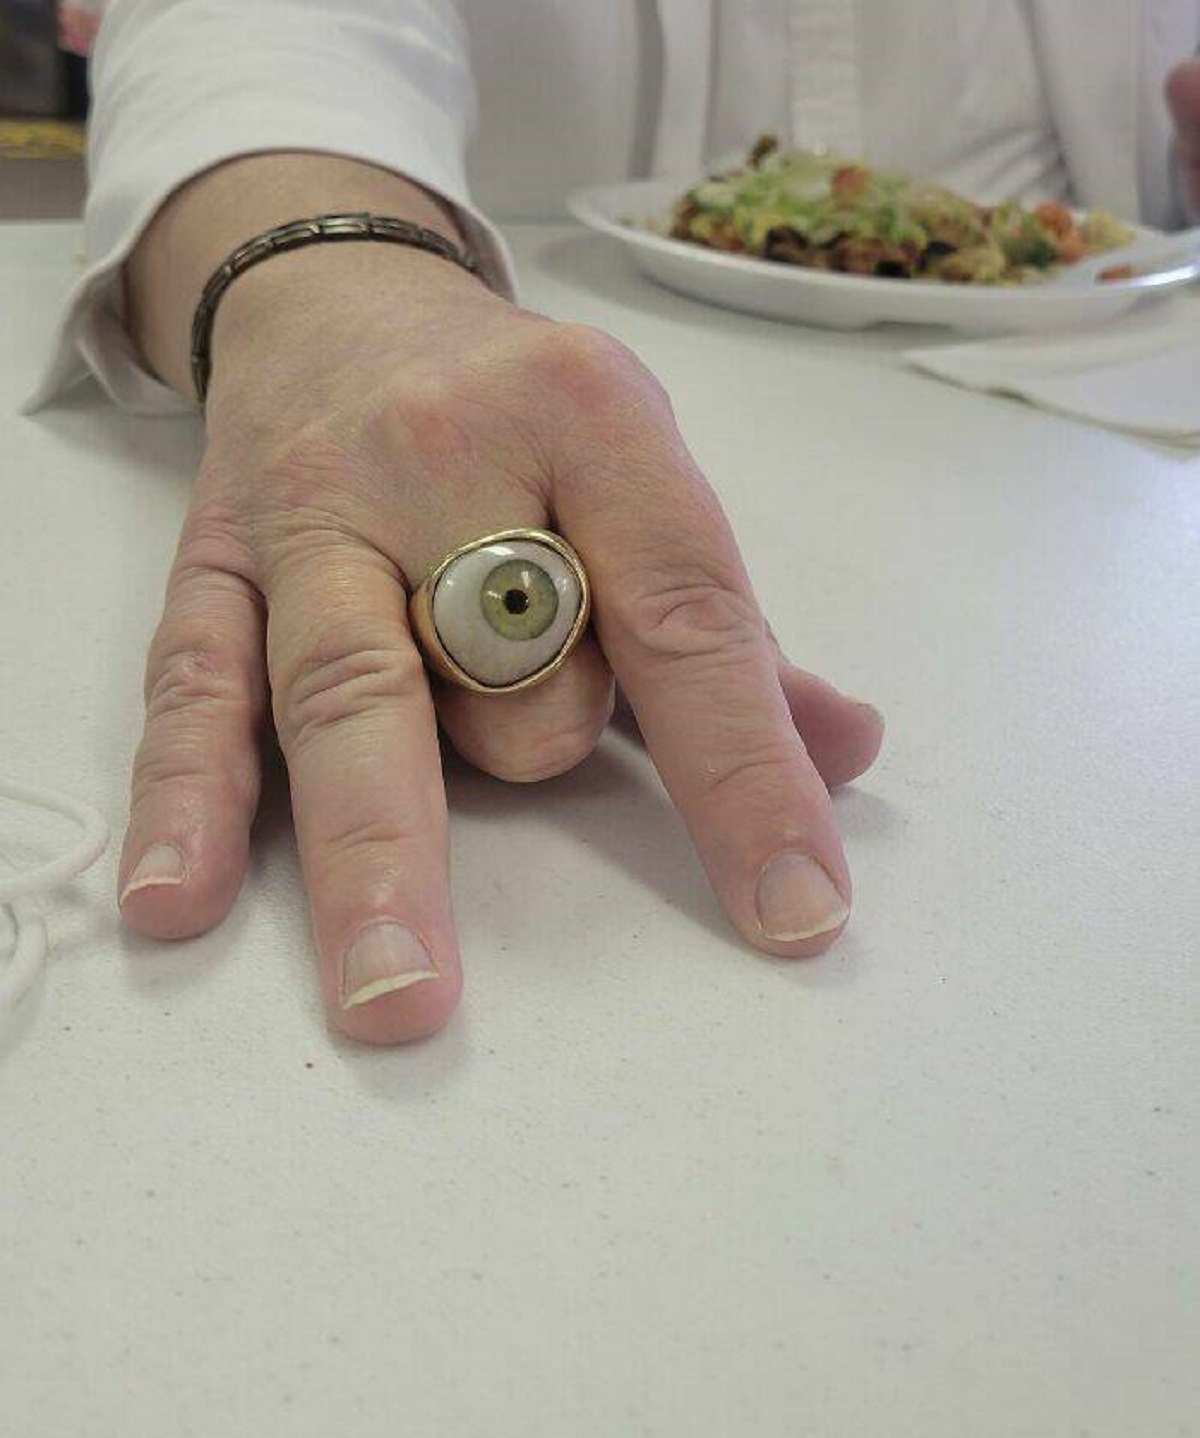 "Met This Guy Who Had His Wife's Eye Professionally Turned Into A Ring"